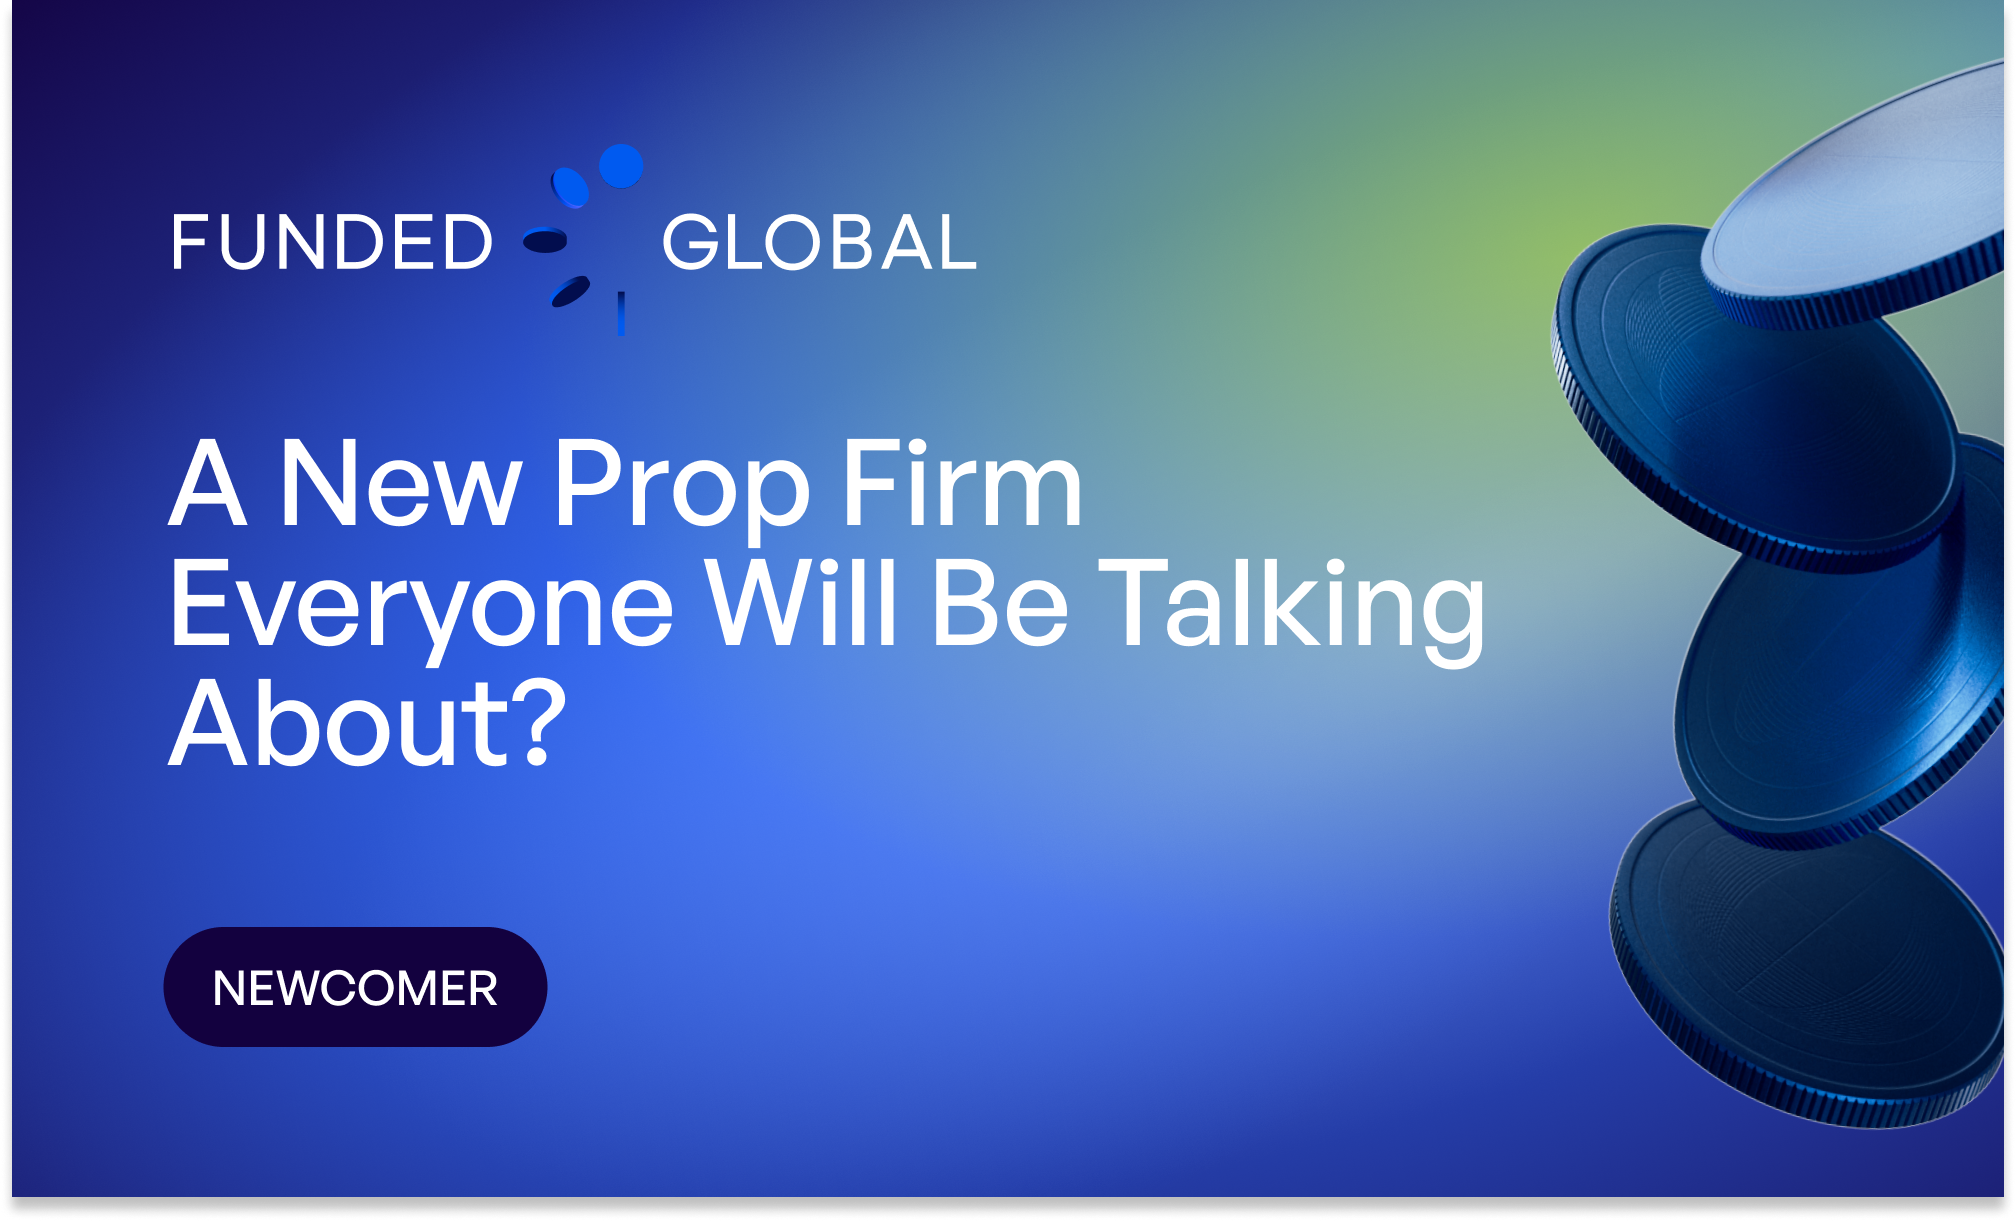 Funded.Global: A New Prop Firm Everyone Will Be Talking About?